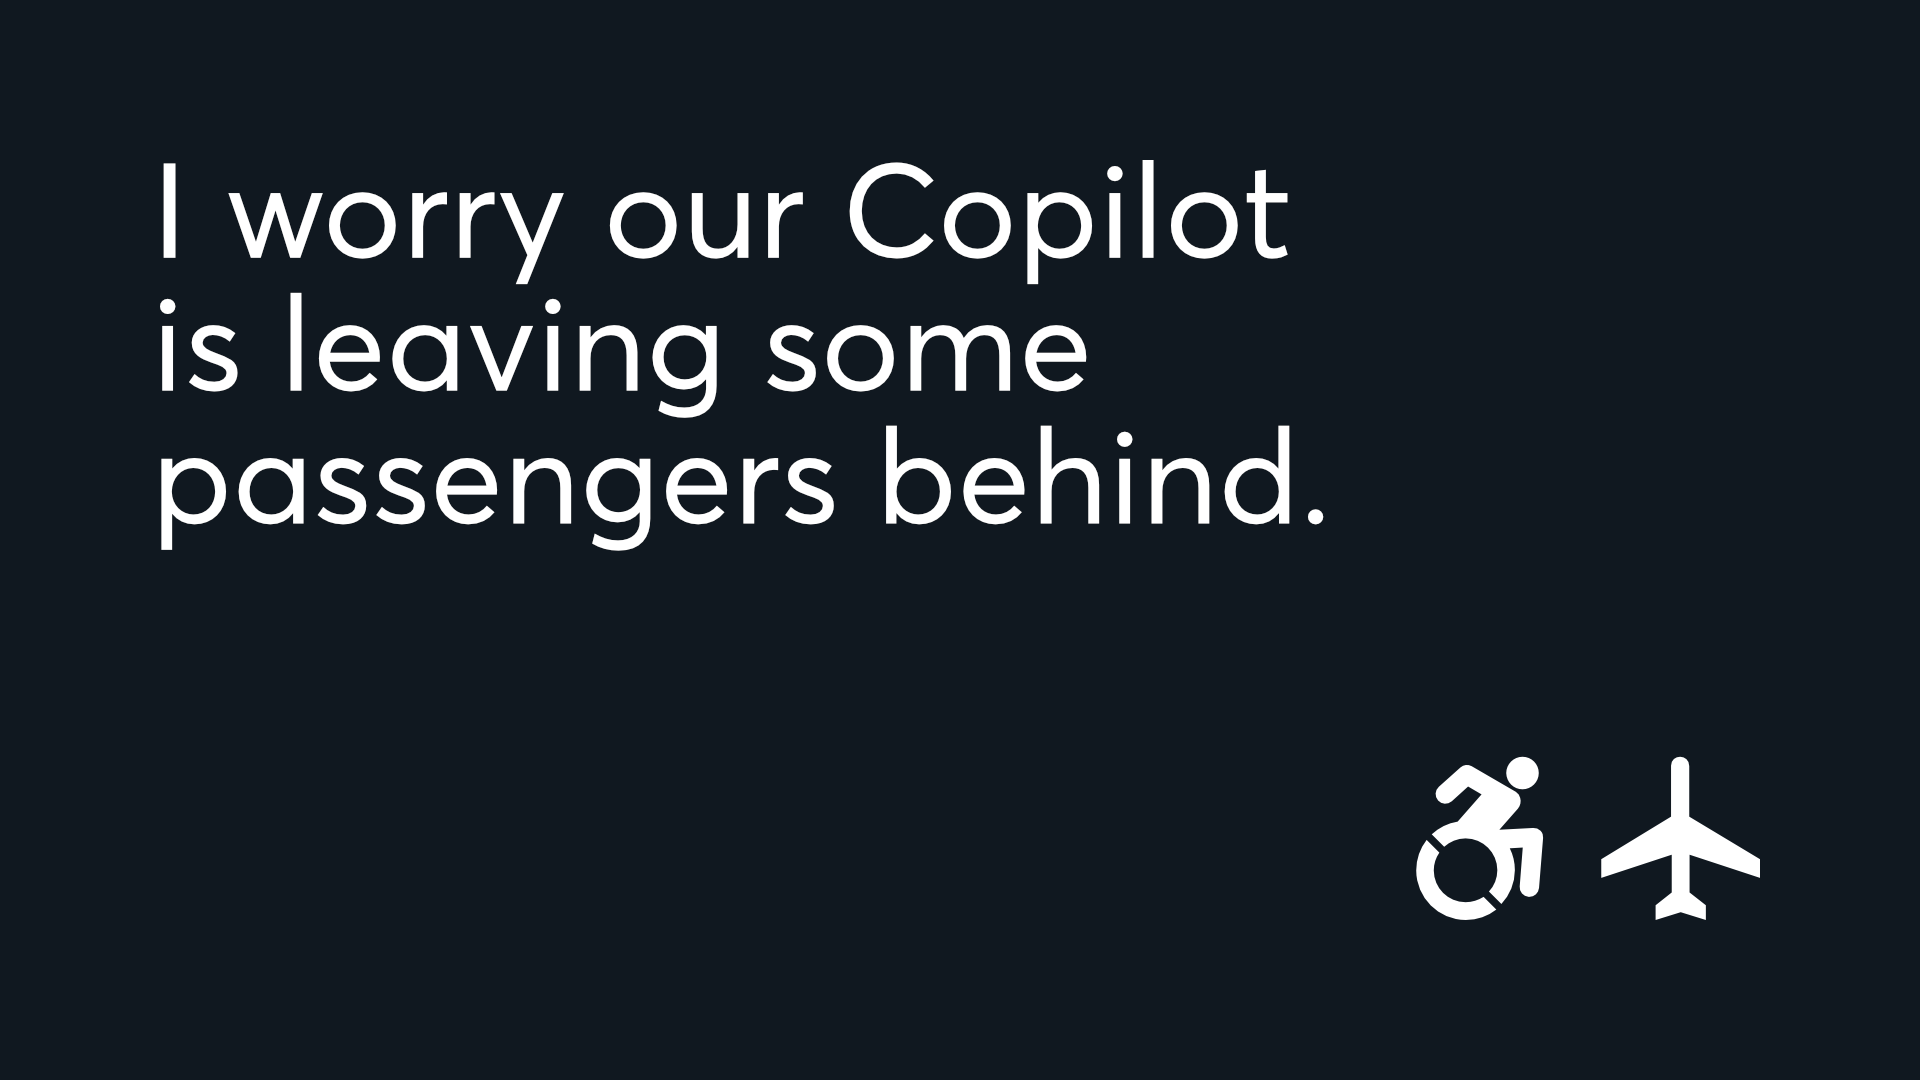 Preview image for I worry our Copilot is leaving some passengers behind